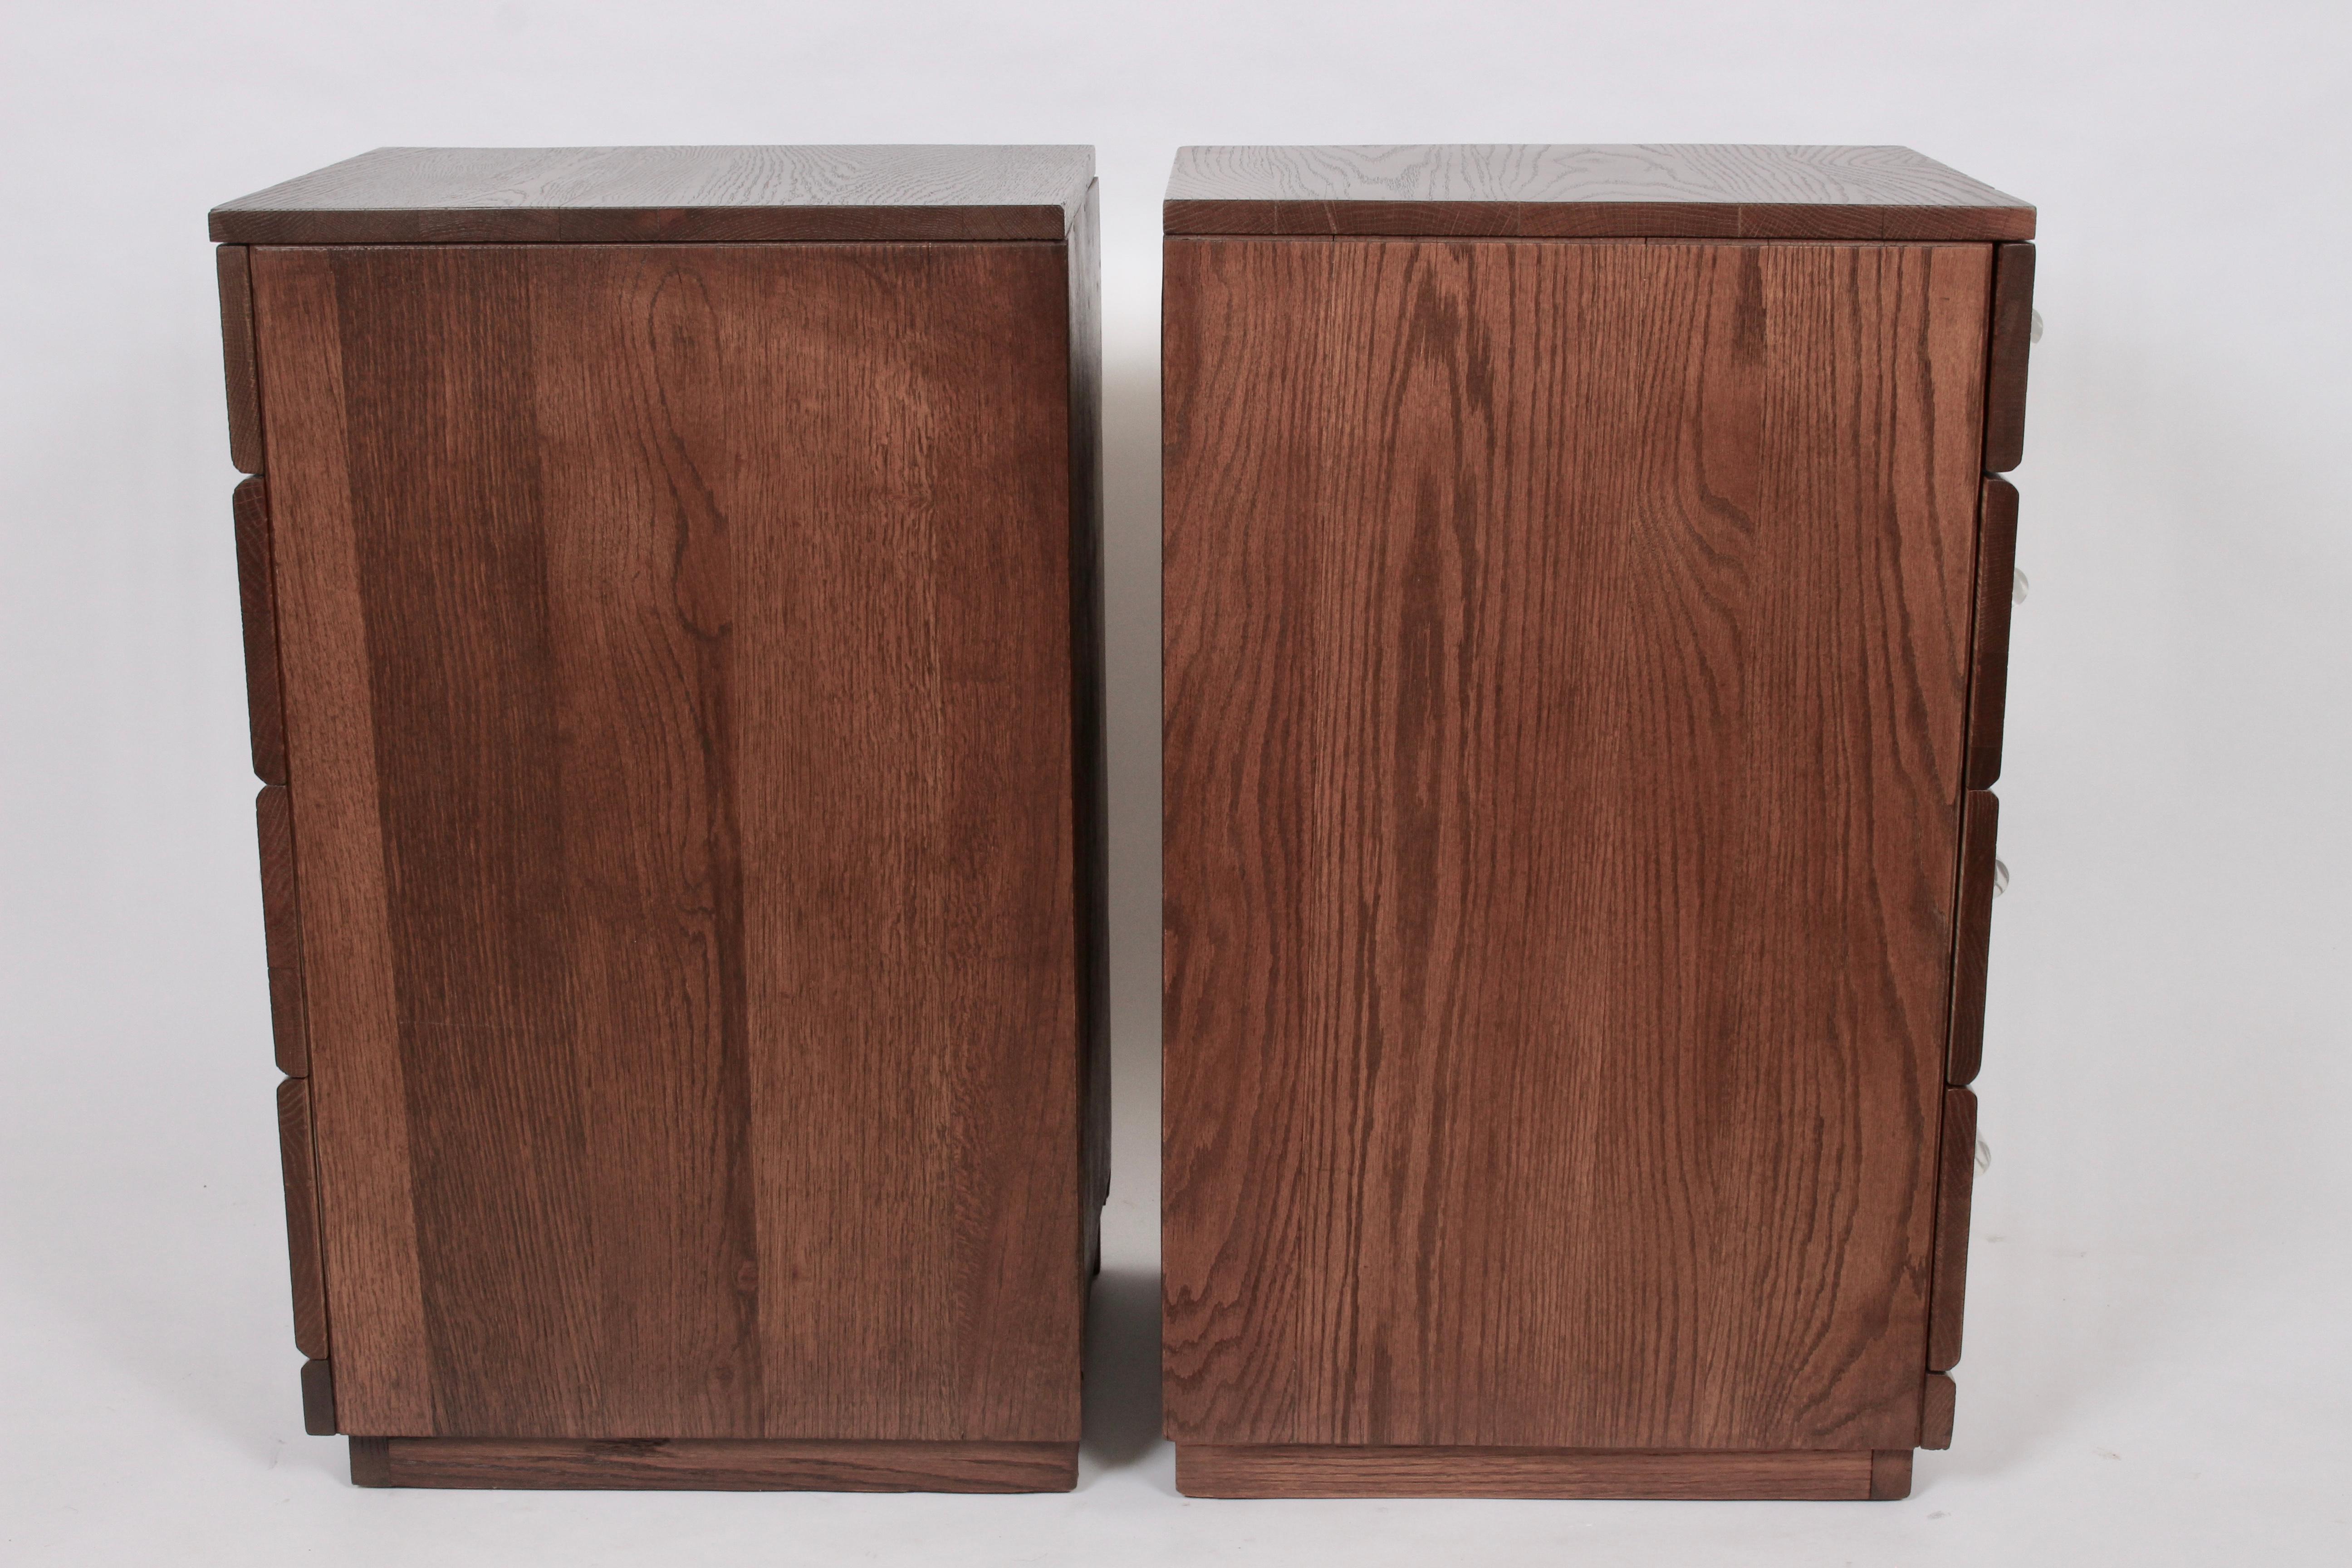 Pair of Raymond Loewy for Mengel 4 drawer stained oak end tables. Tall with custom Lucite pulls, Chestnut finish, sectional top drawers, ample storage. Mengel stamp to inside drawer. Refinished.